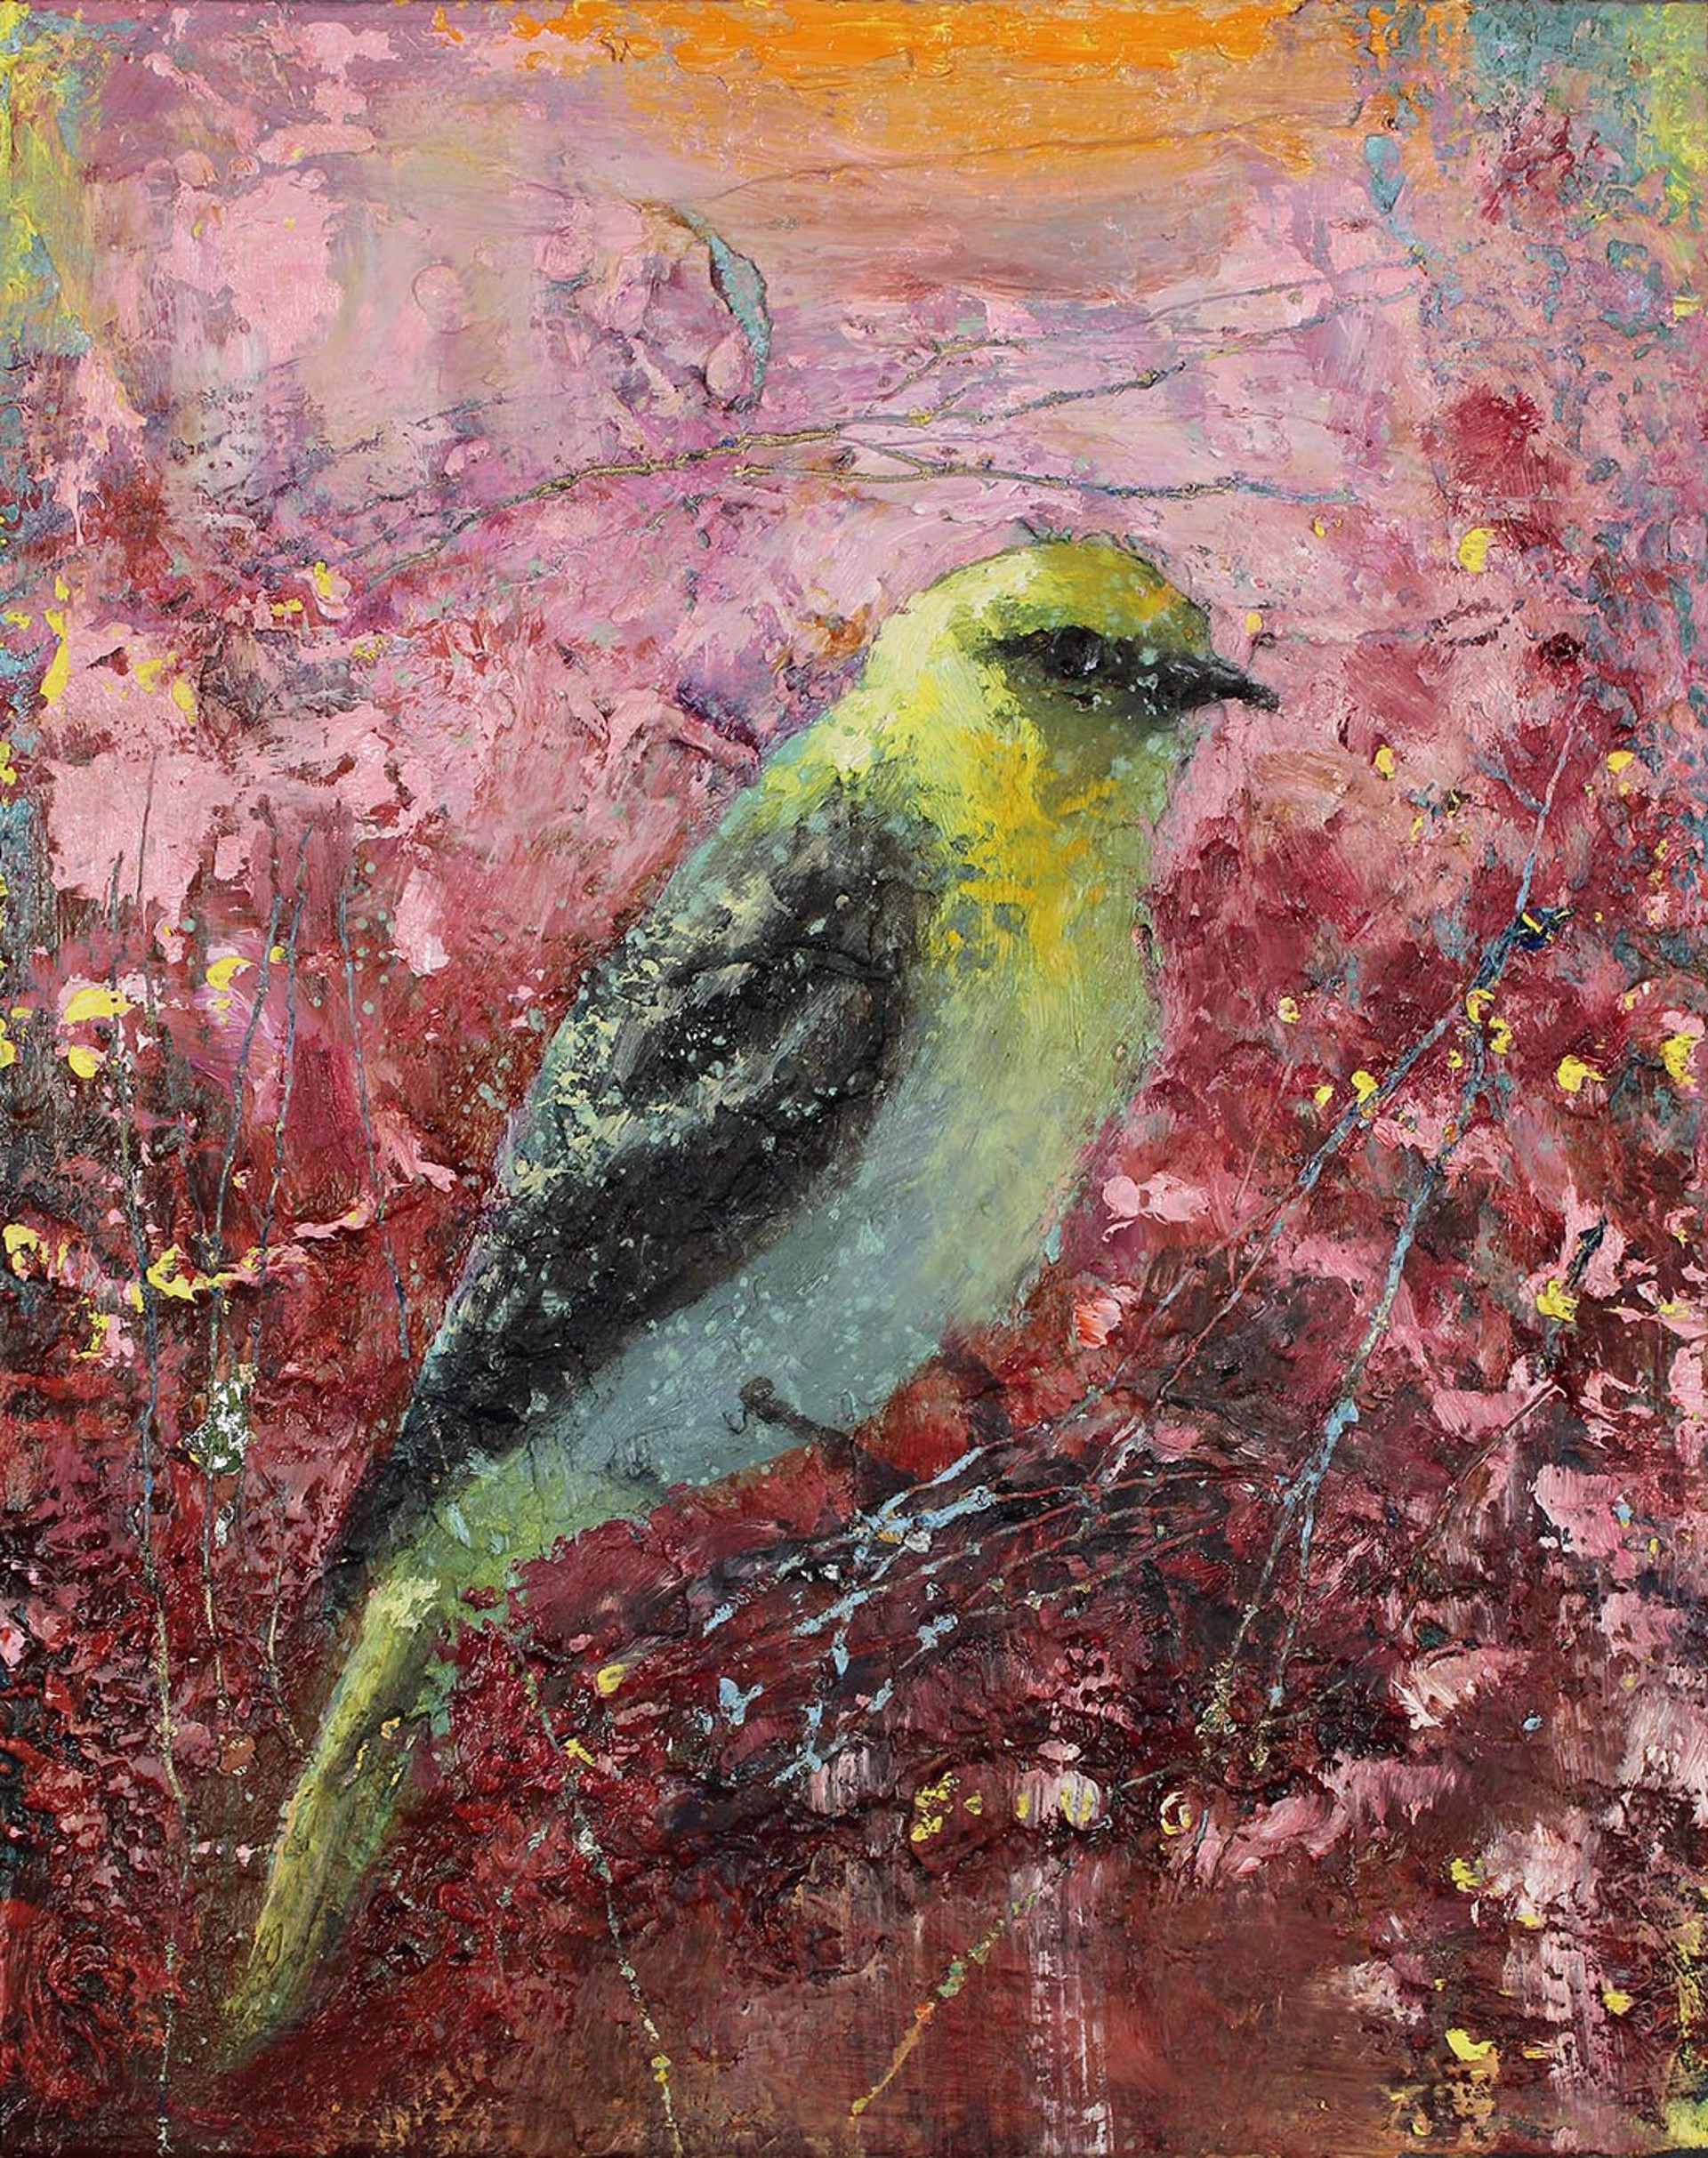 A Mixed Media Painting Of A Small Yellow Bird On A Flowering Branch By Matt Flint At Gallery Wild